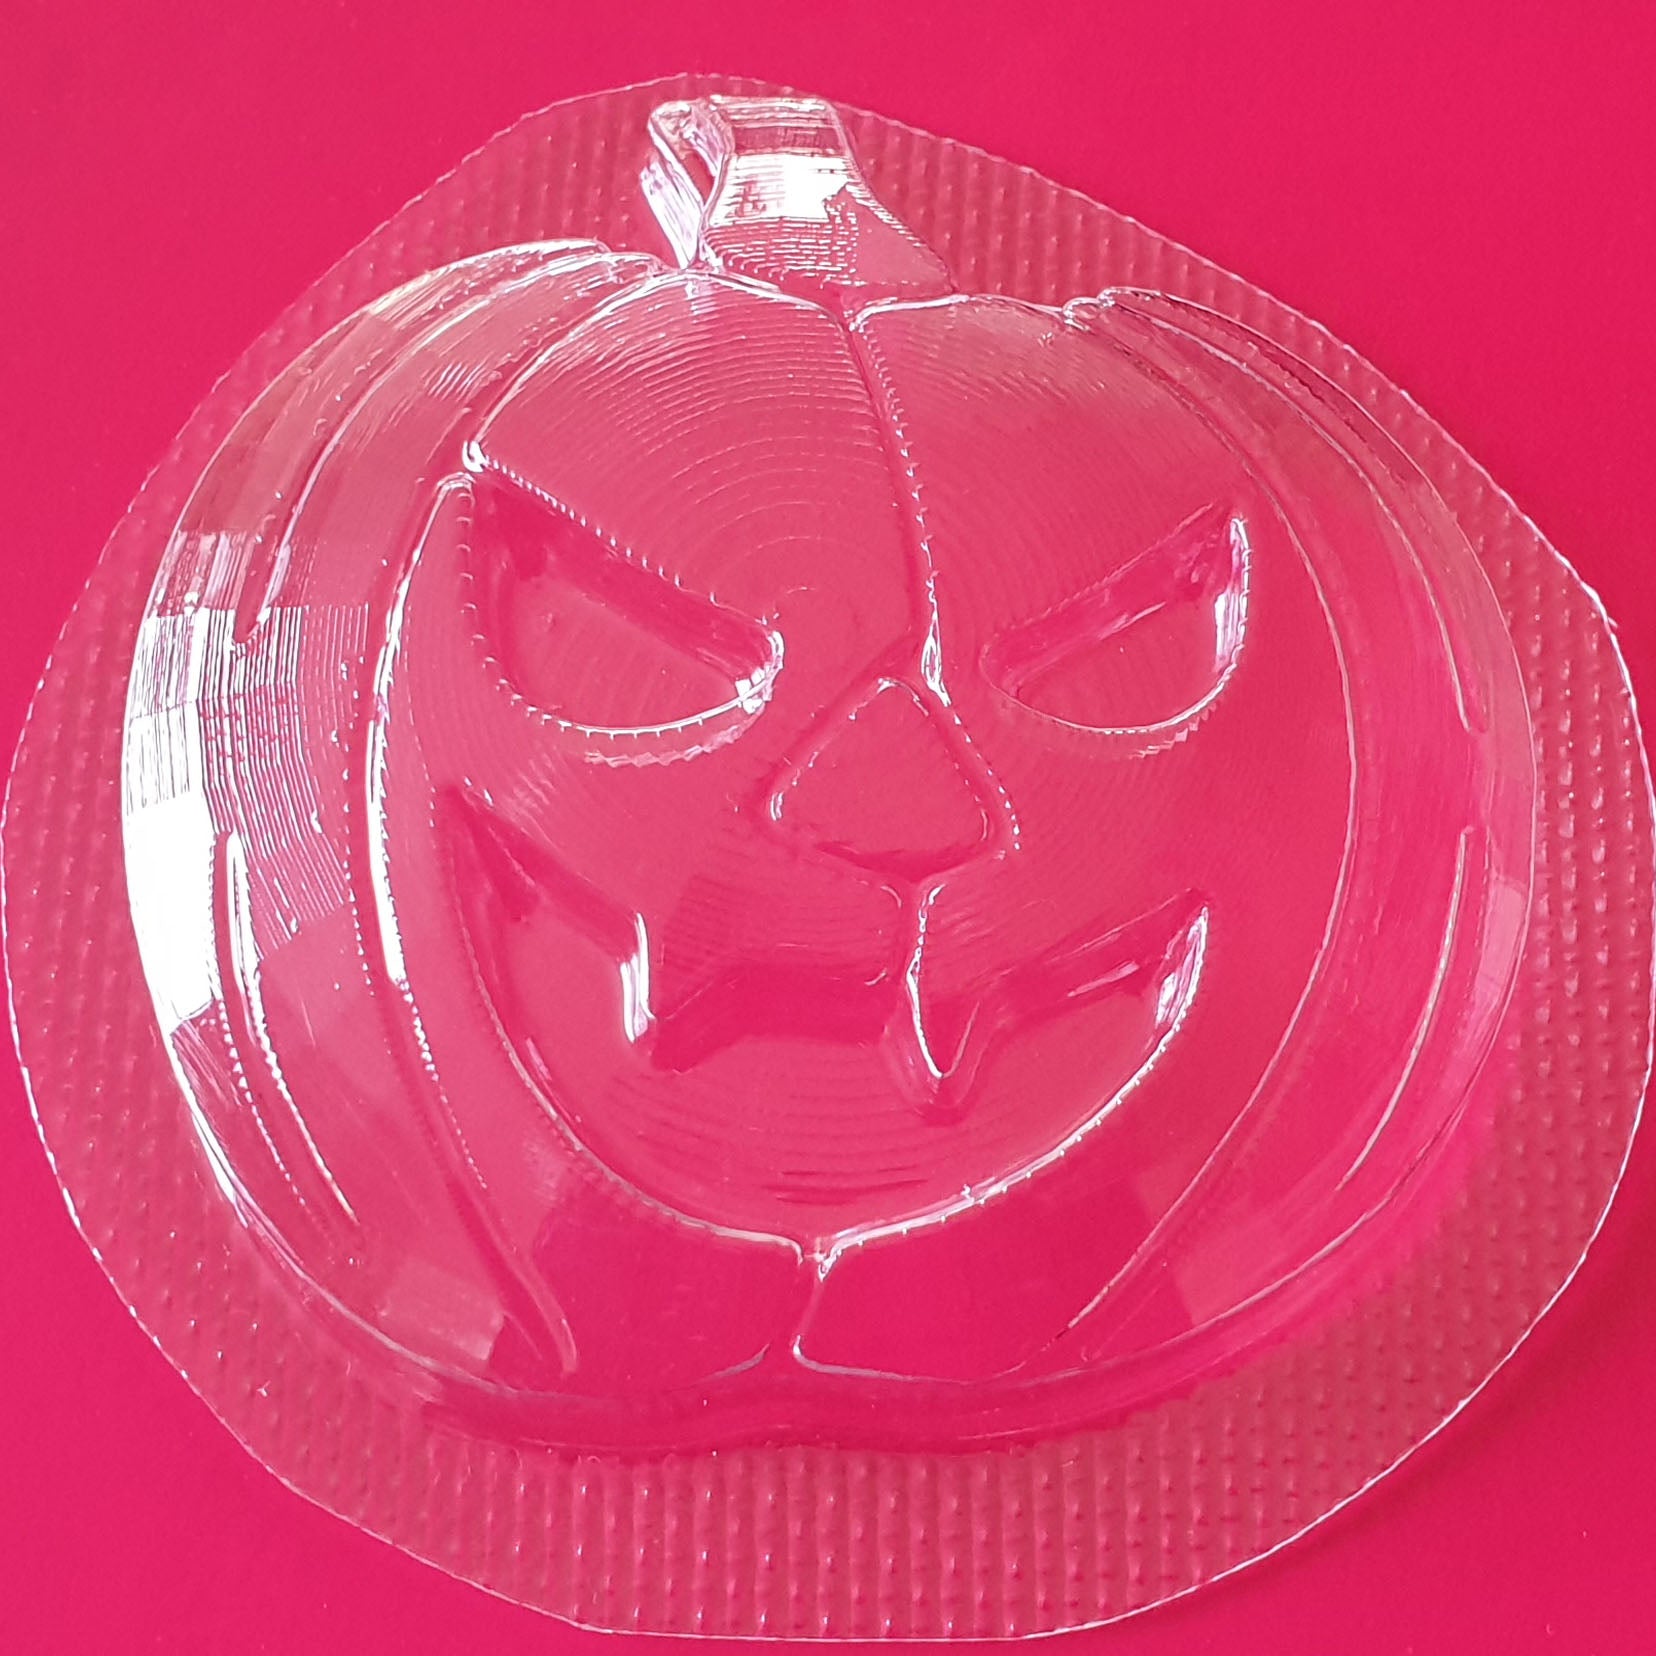 Pumpkin Mould | Truly Personal | Bath Bomb, Soap, Resin, Chocolate, Jelly, Wax Melts Mold